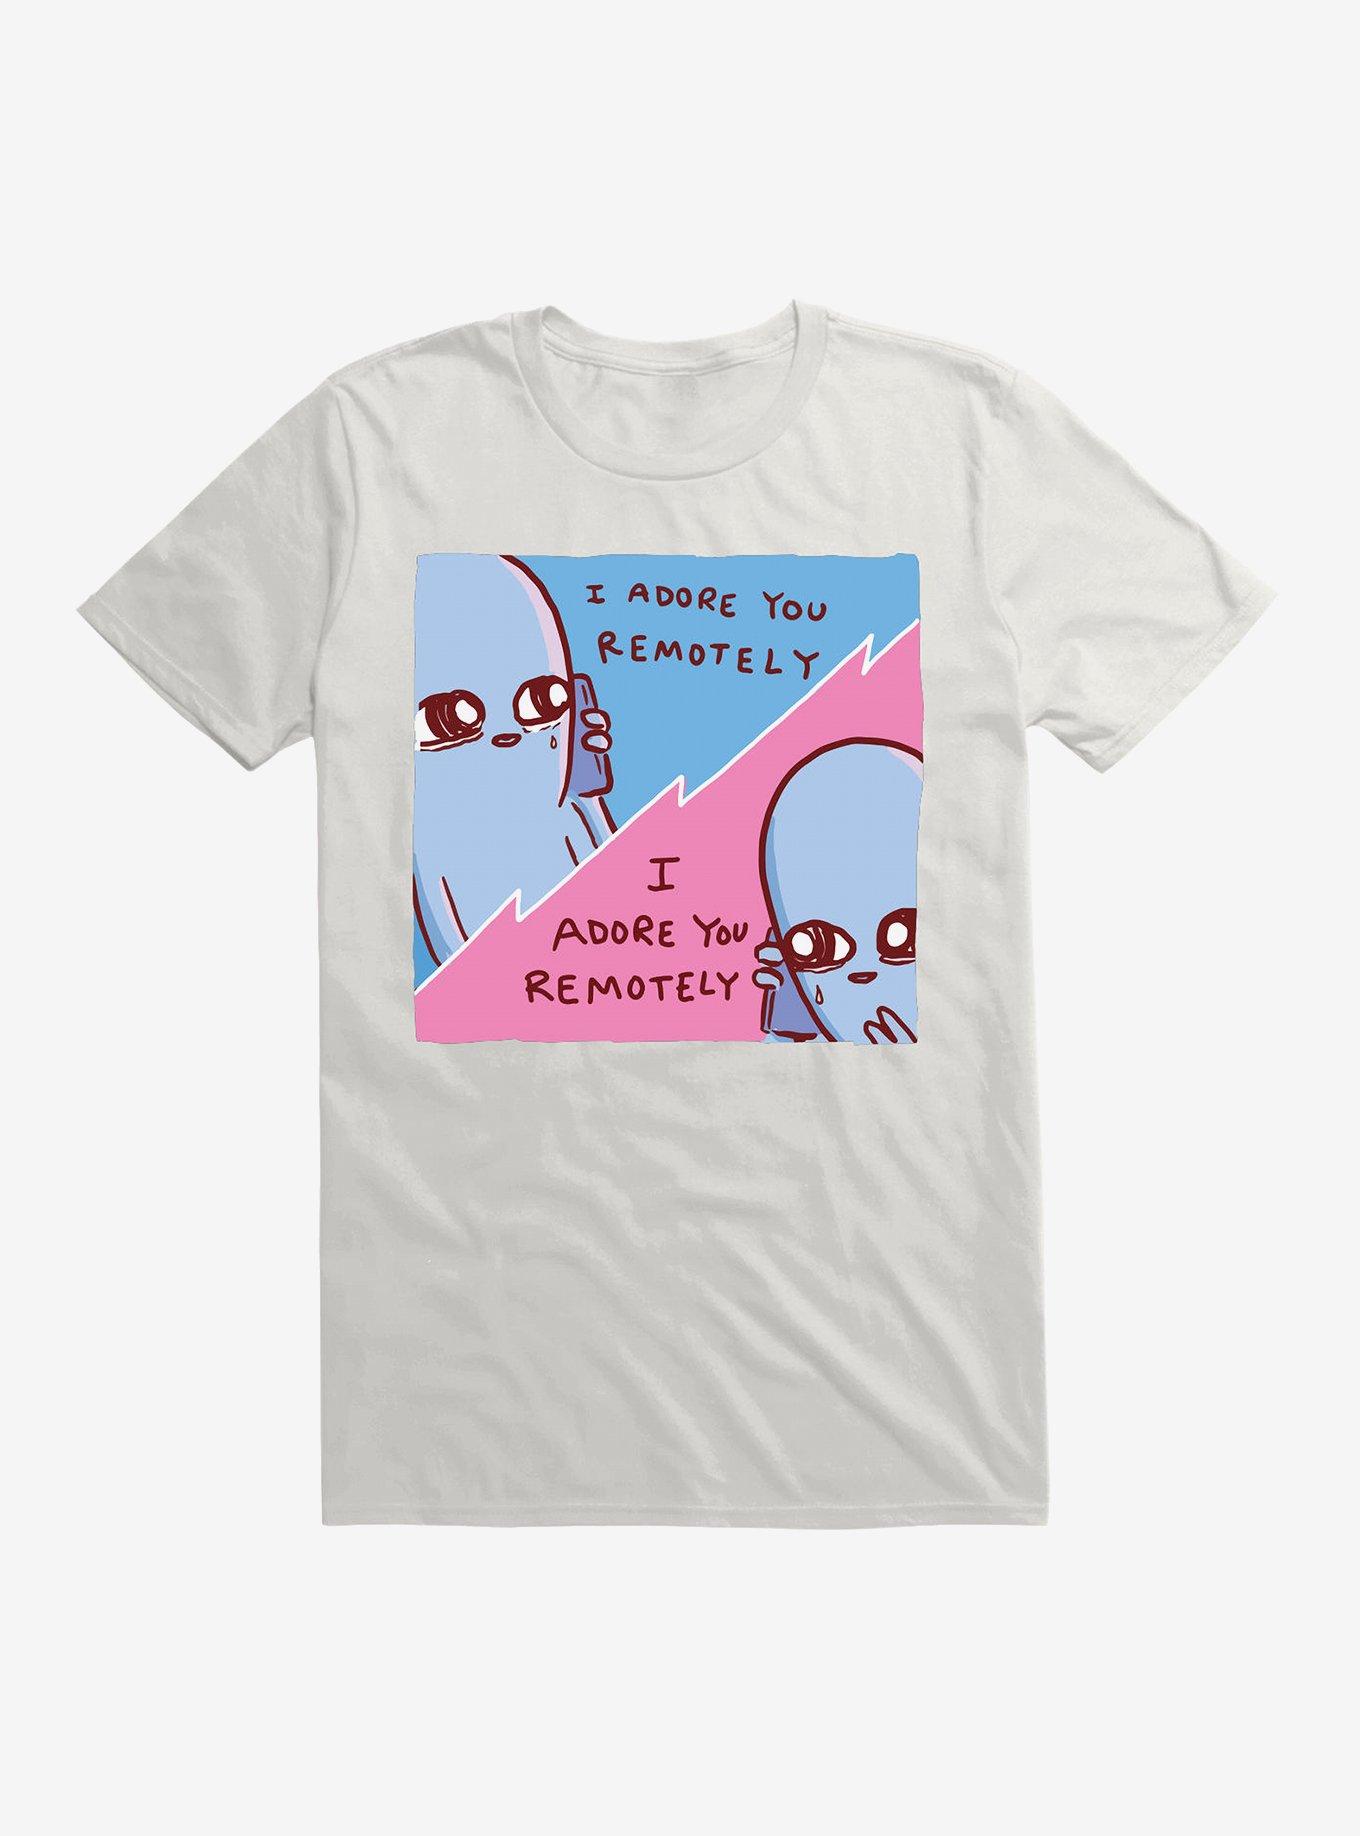 STRANGE PLANET: YOU ARE THE BEING T-Shirt